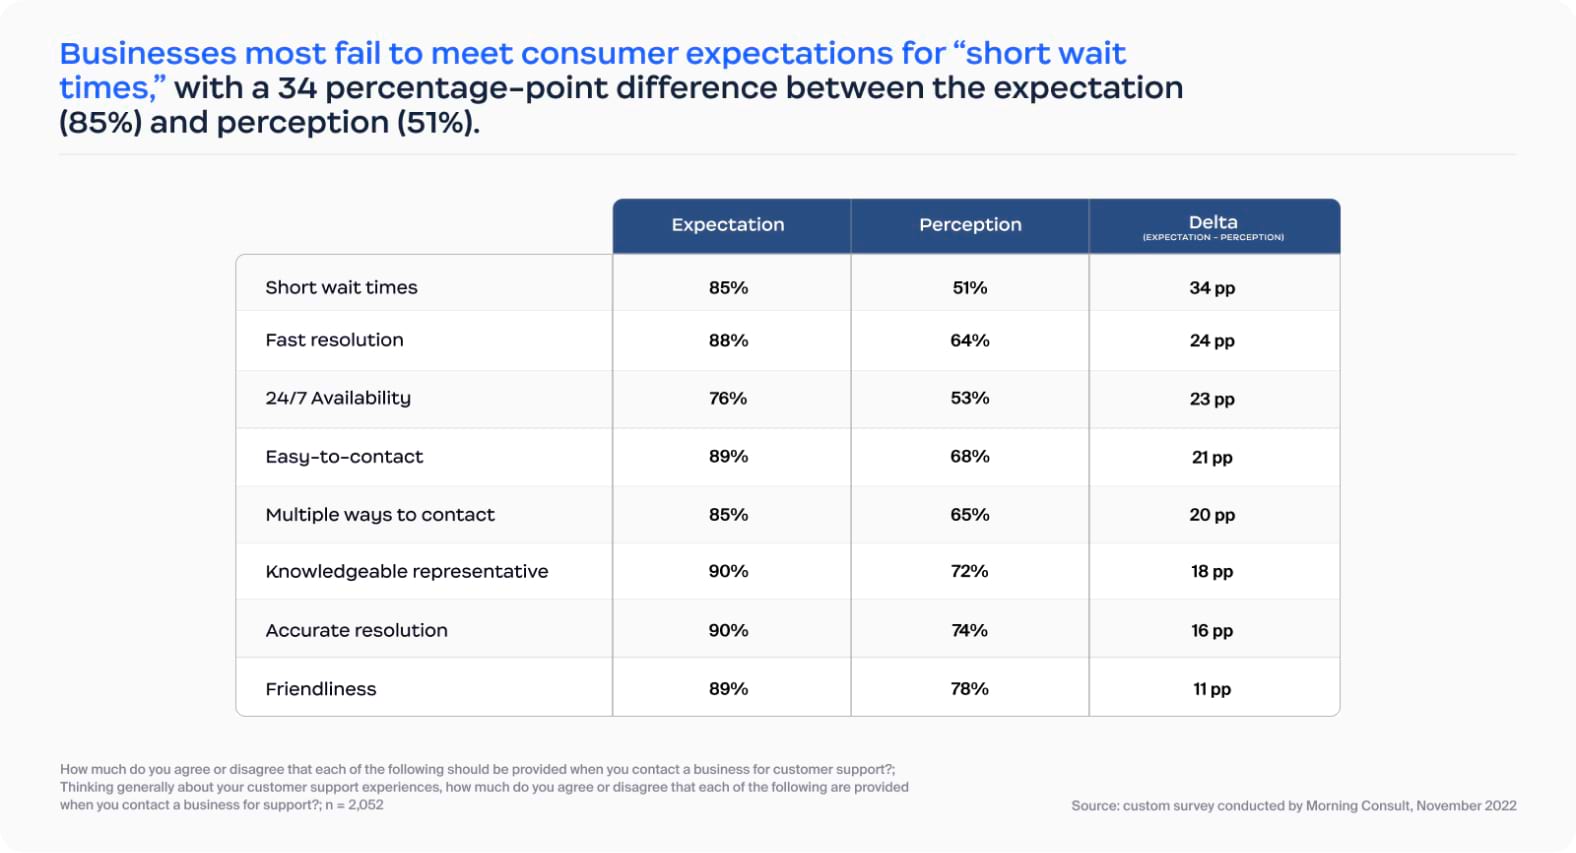 Businesses most fail to meet consumer expectations for "short wait times"